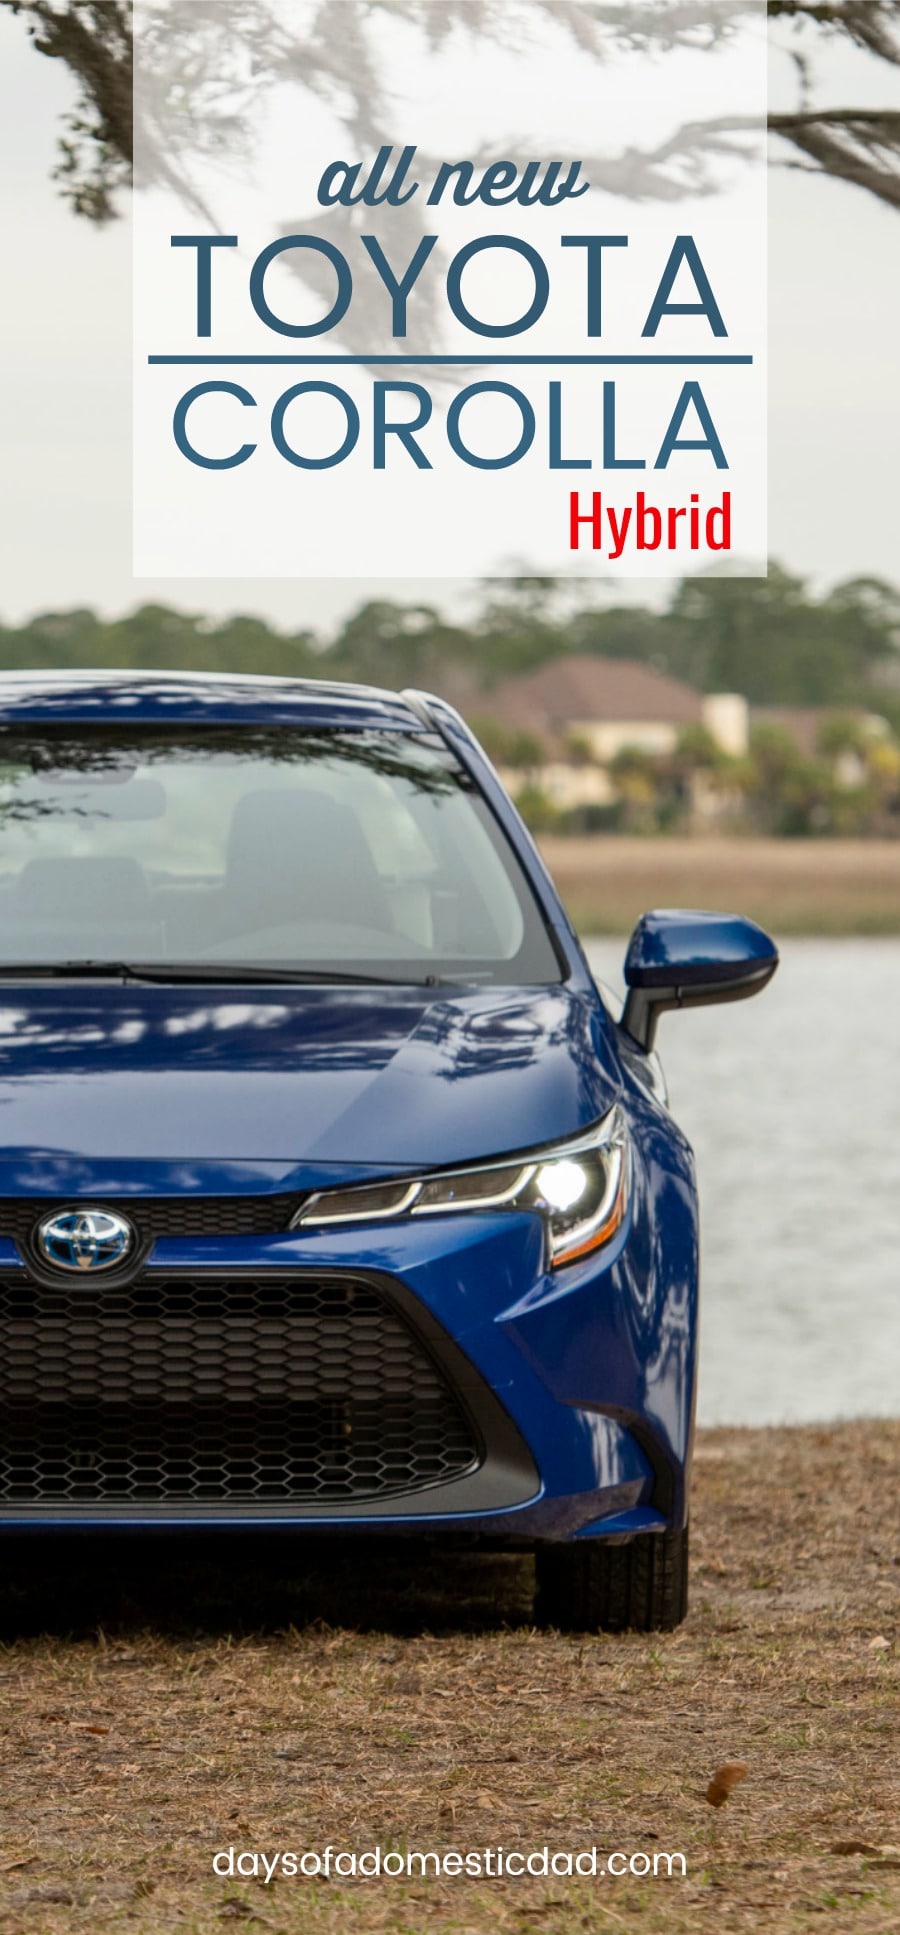 The All-New Toyota Corolla Hybrid is Electrifying